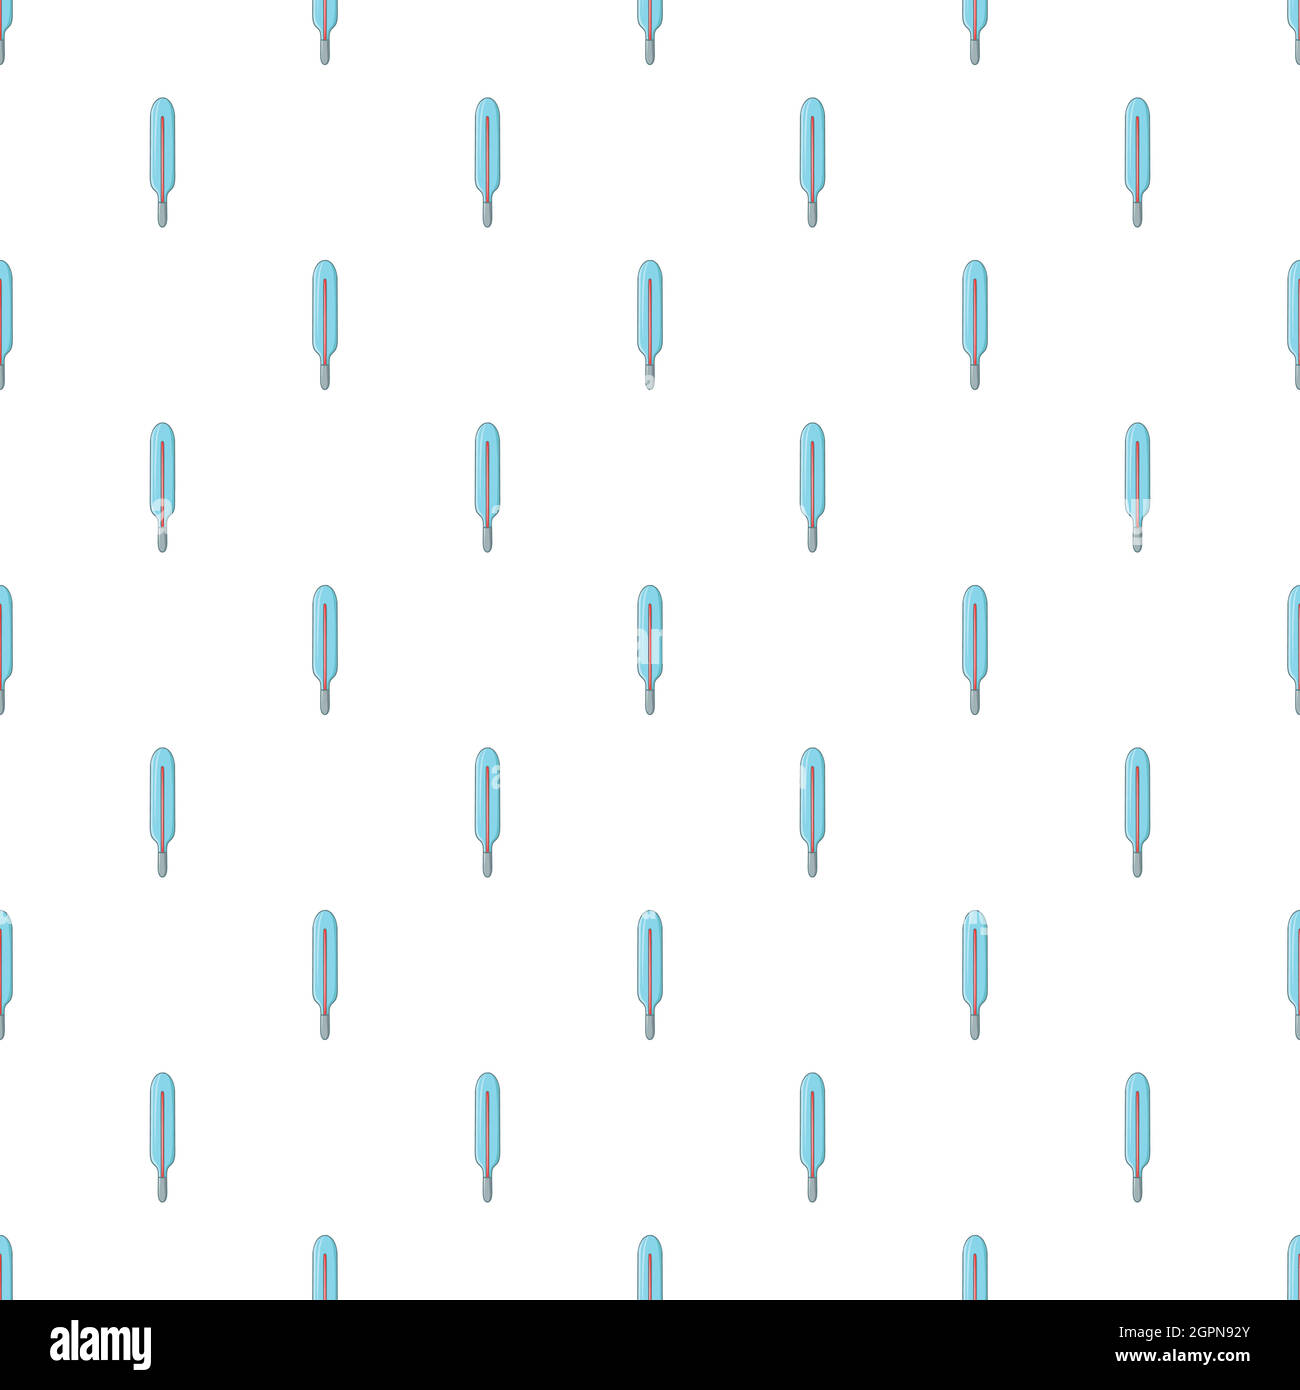 Thermometer pattern, cartoon style Stock Vector